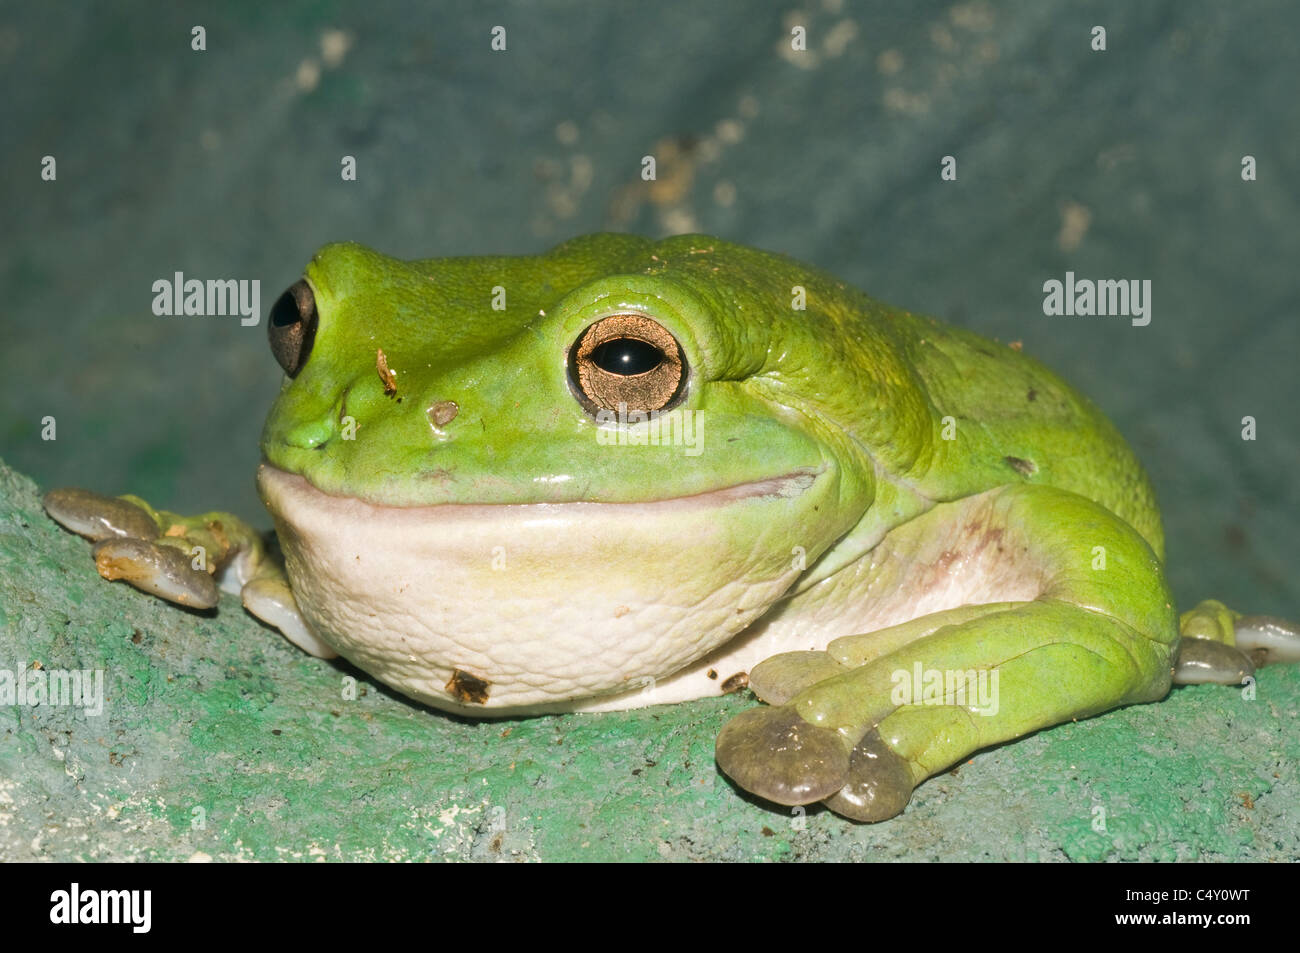 Giant tree frog (aka white-lipped tree frog) at Cairns Tropical Zoo in Queensland Australia Stock Photo